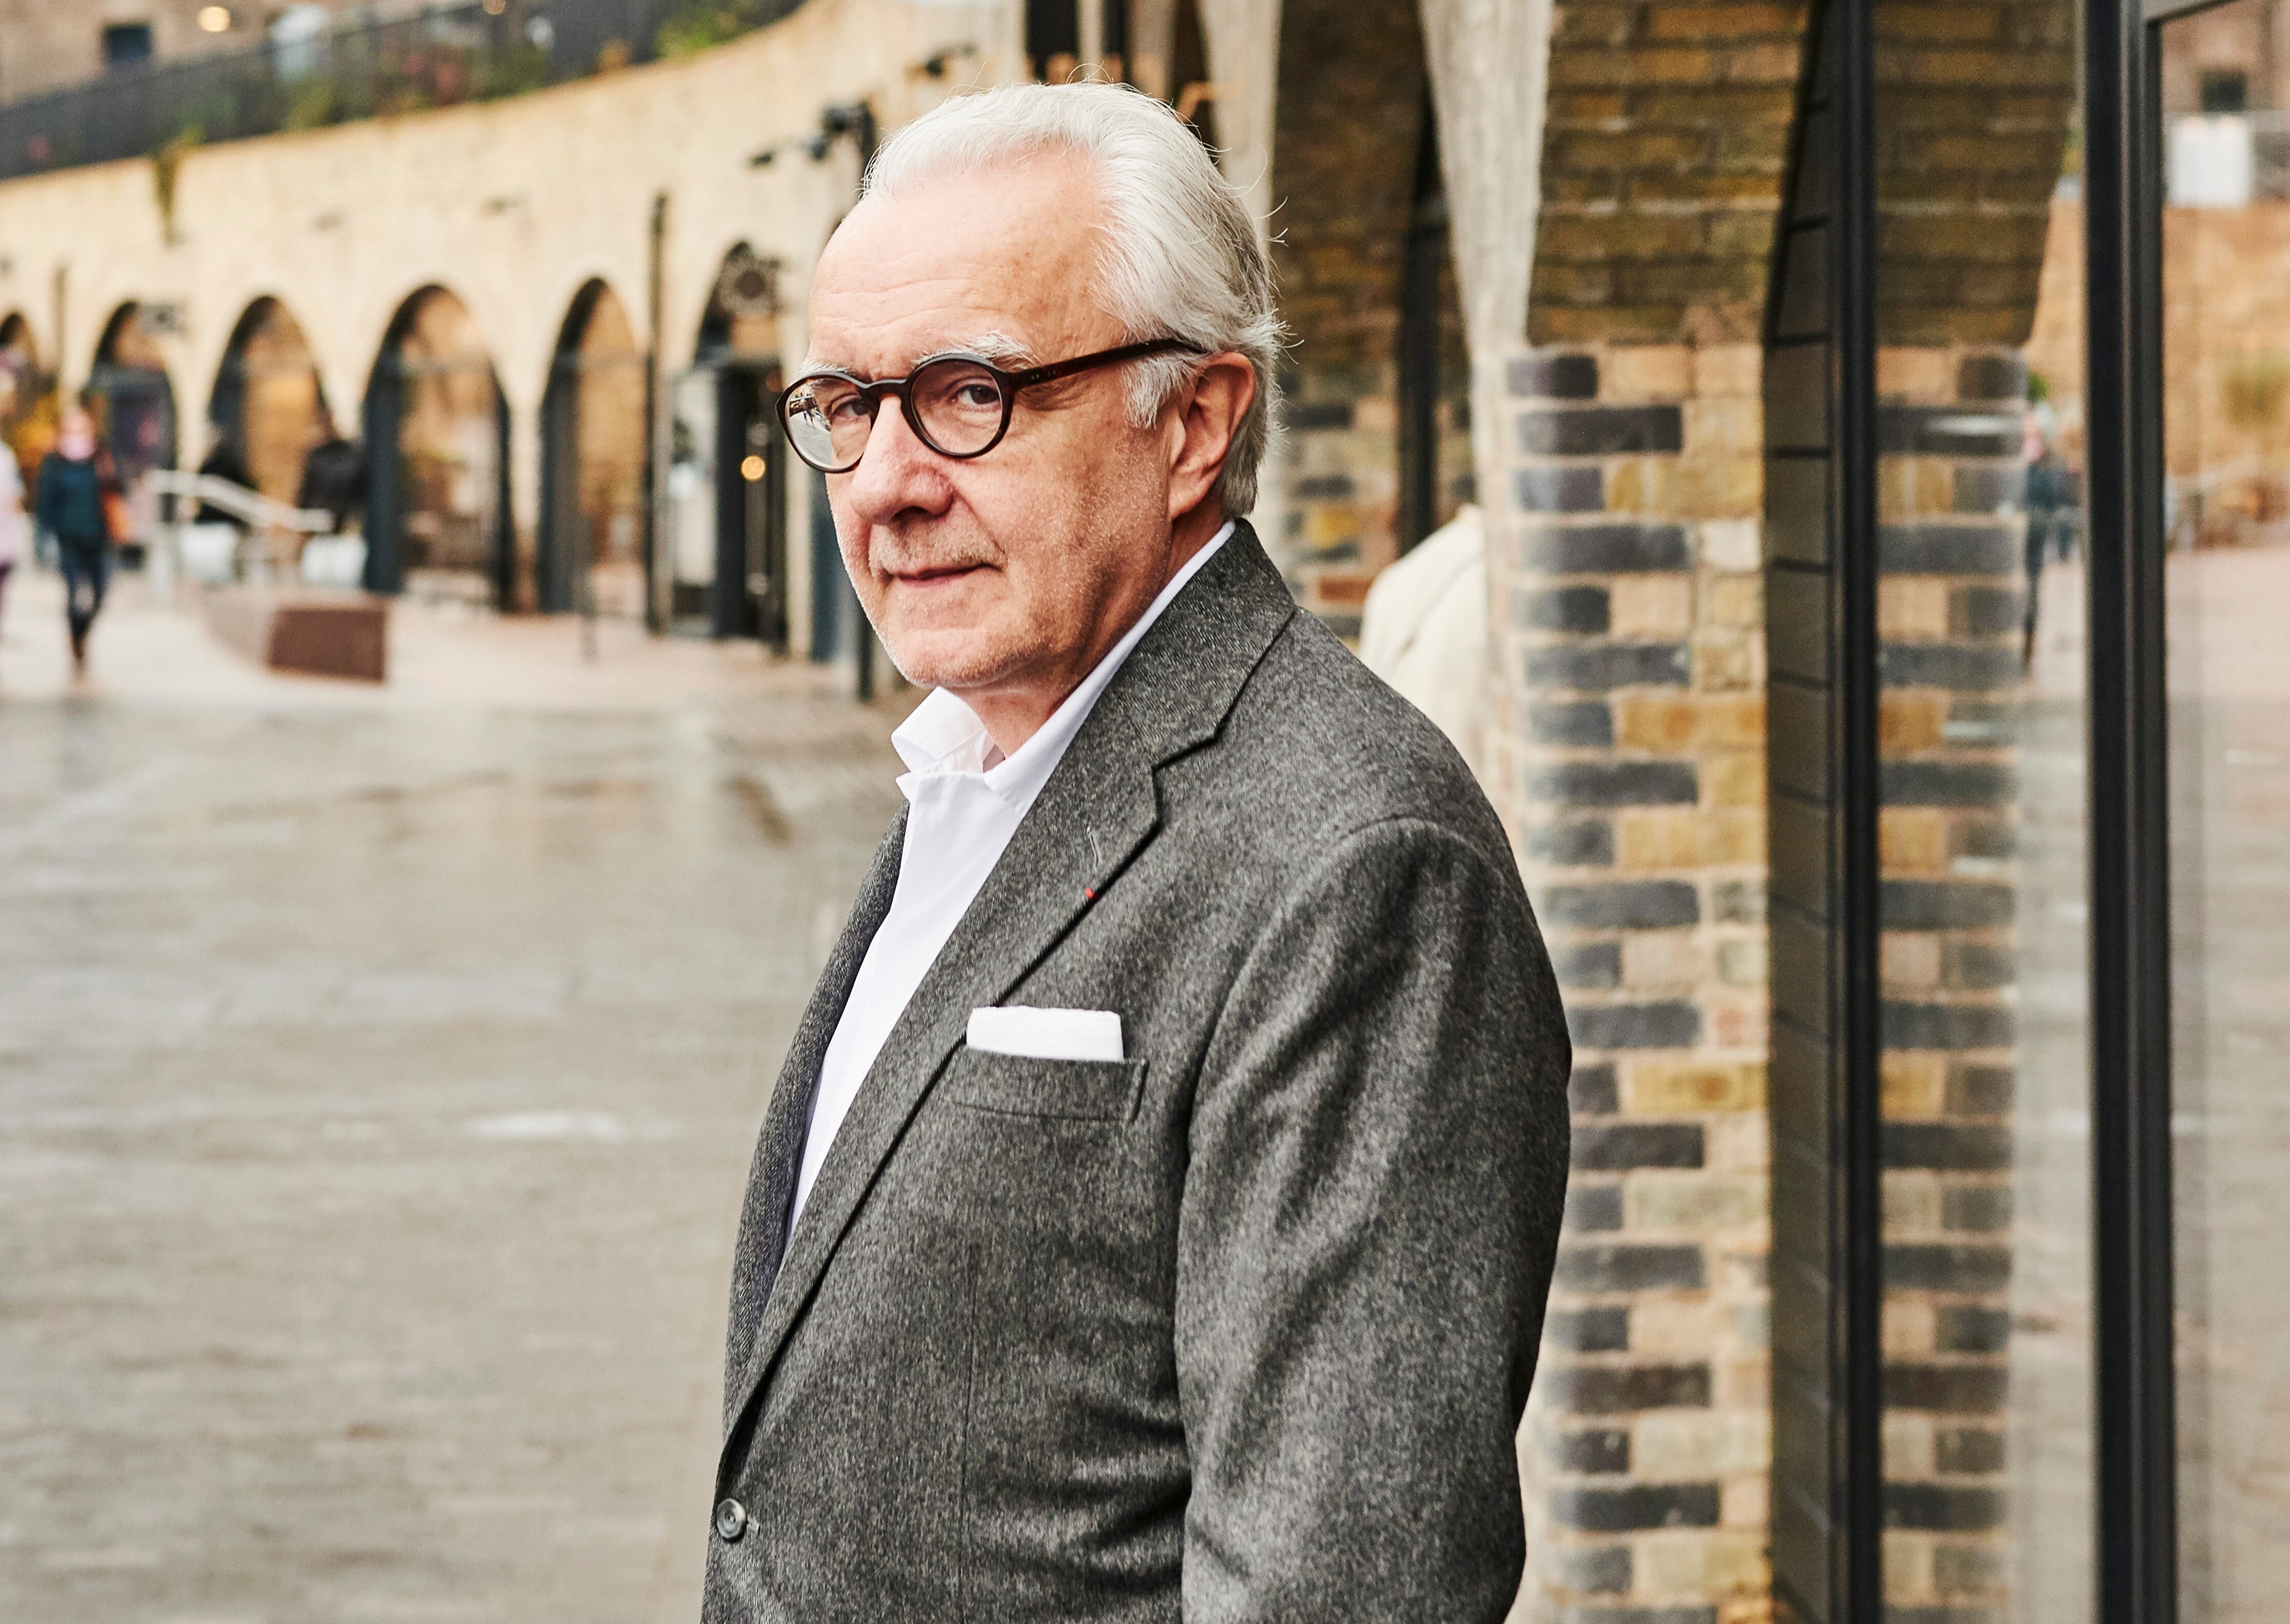 Alain Ducasse at the Dorchester not affected by end of partnership with Hôtel Plaza Athénée